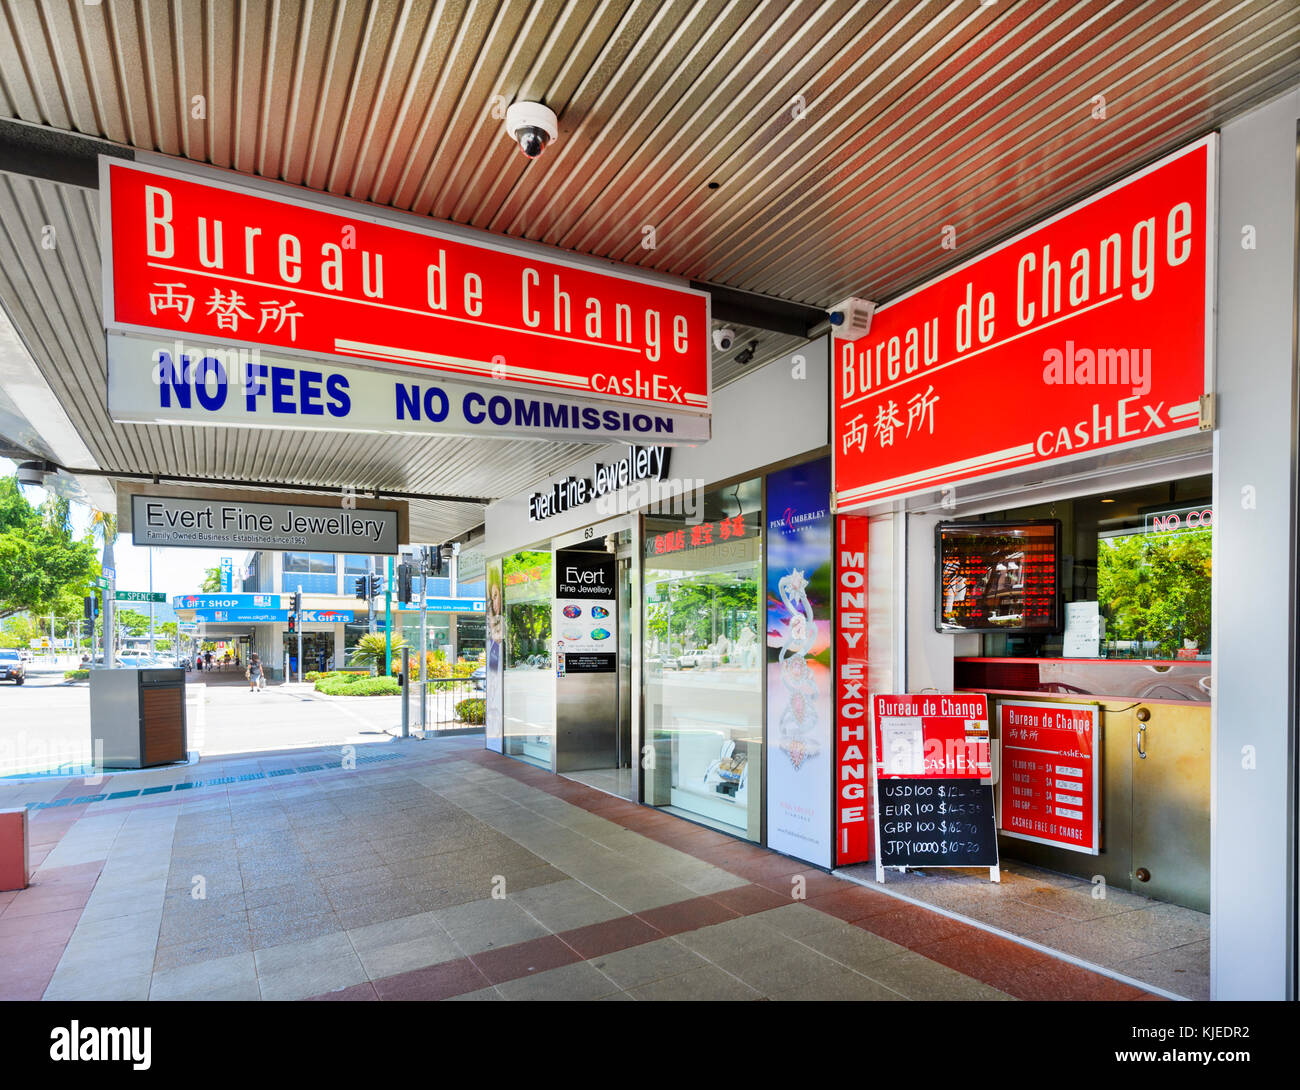 Bureau de Change with signs in Chinese, Cairns, Far North Queensland, FNQ, QLD, Australia Stock Photo